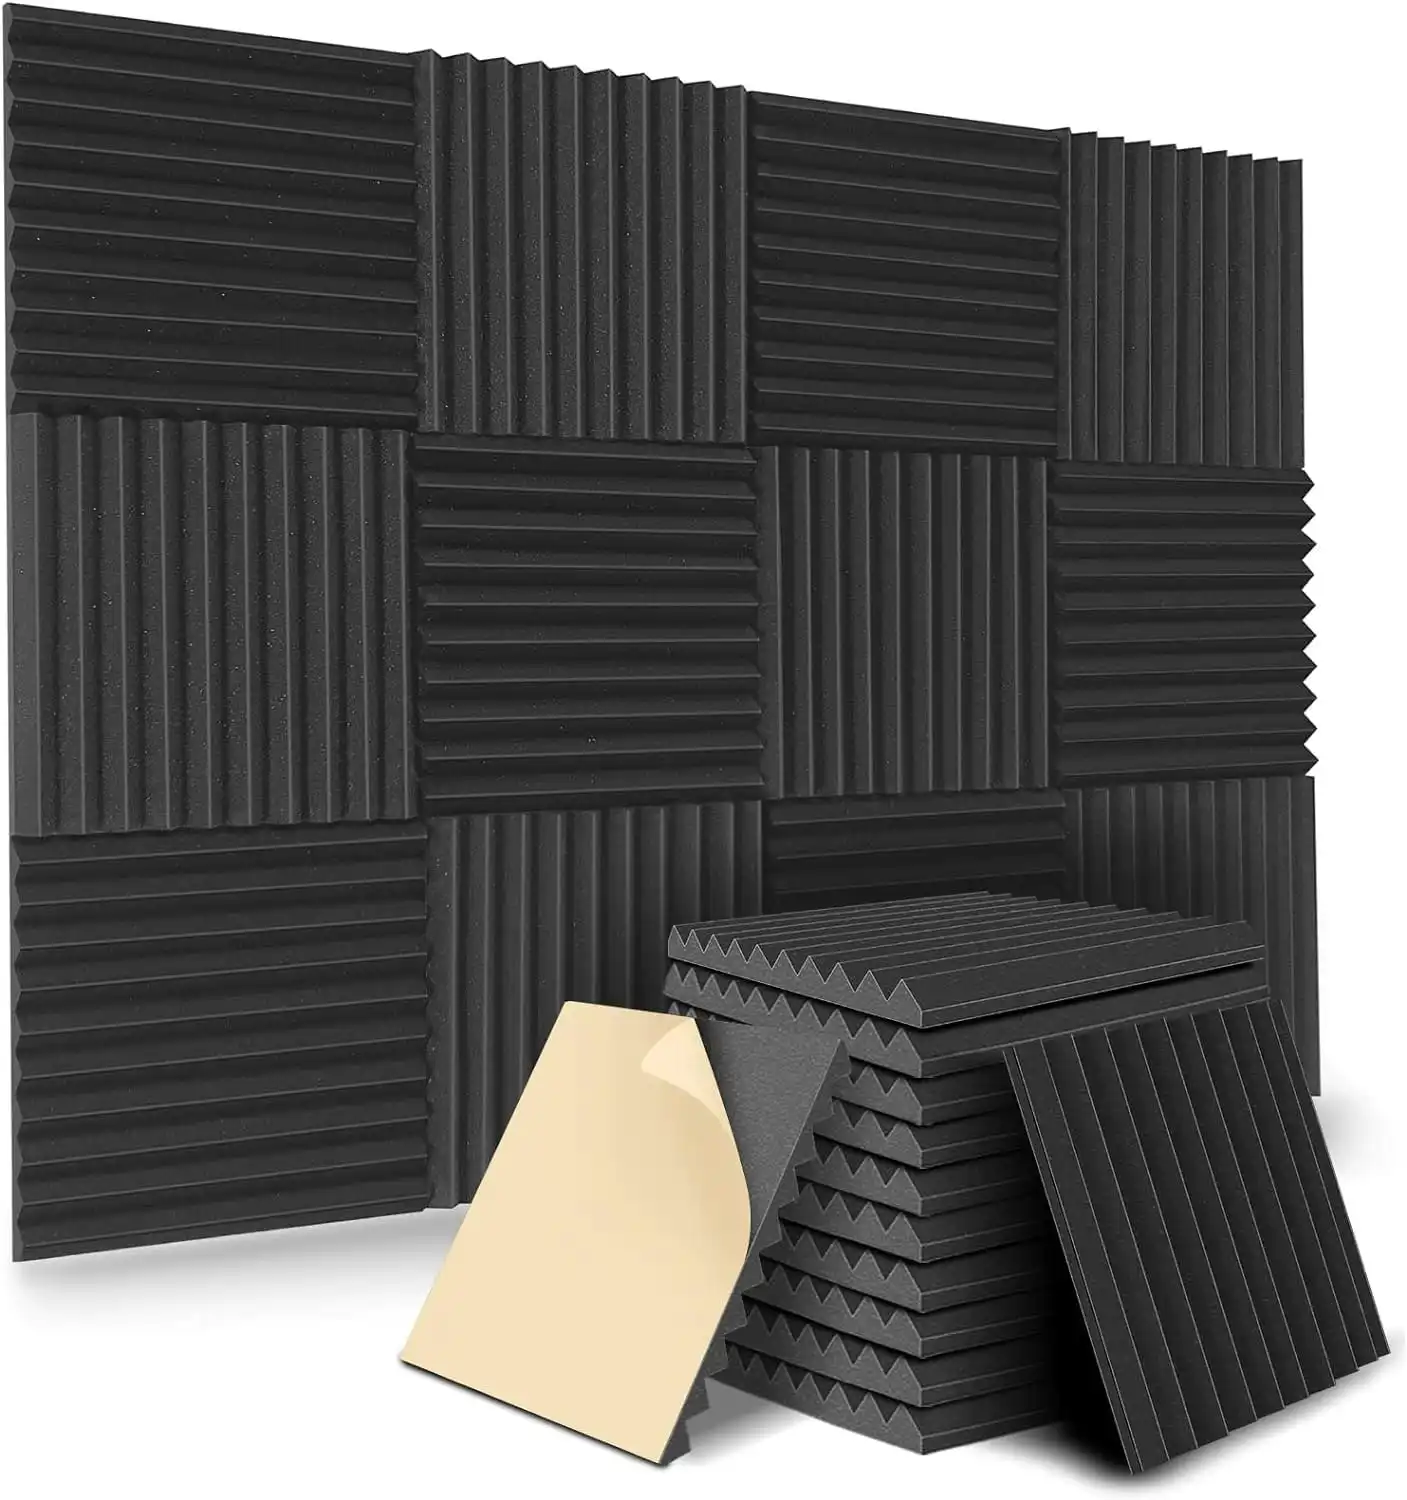 12 Pack| Self Adhesive Studio Acoustic Foam Sound Proofing Panel Strong Absorption (30cm x 30cm x 5cm)